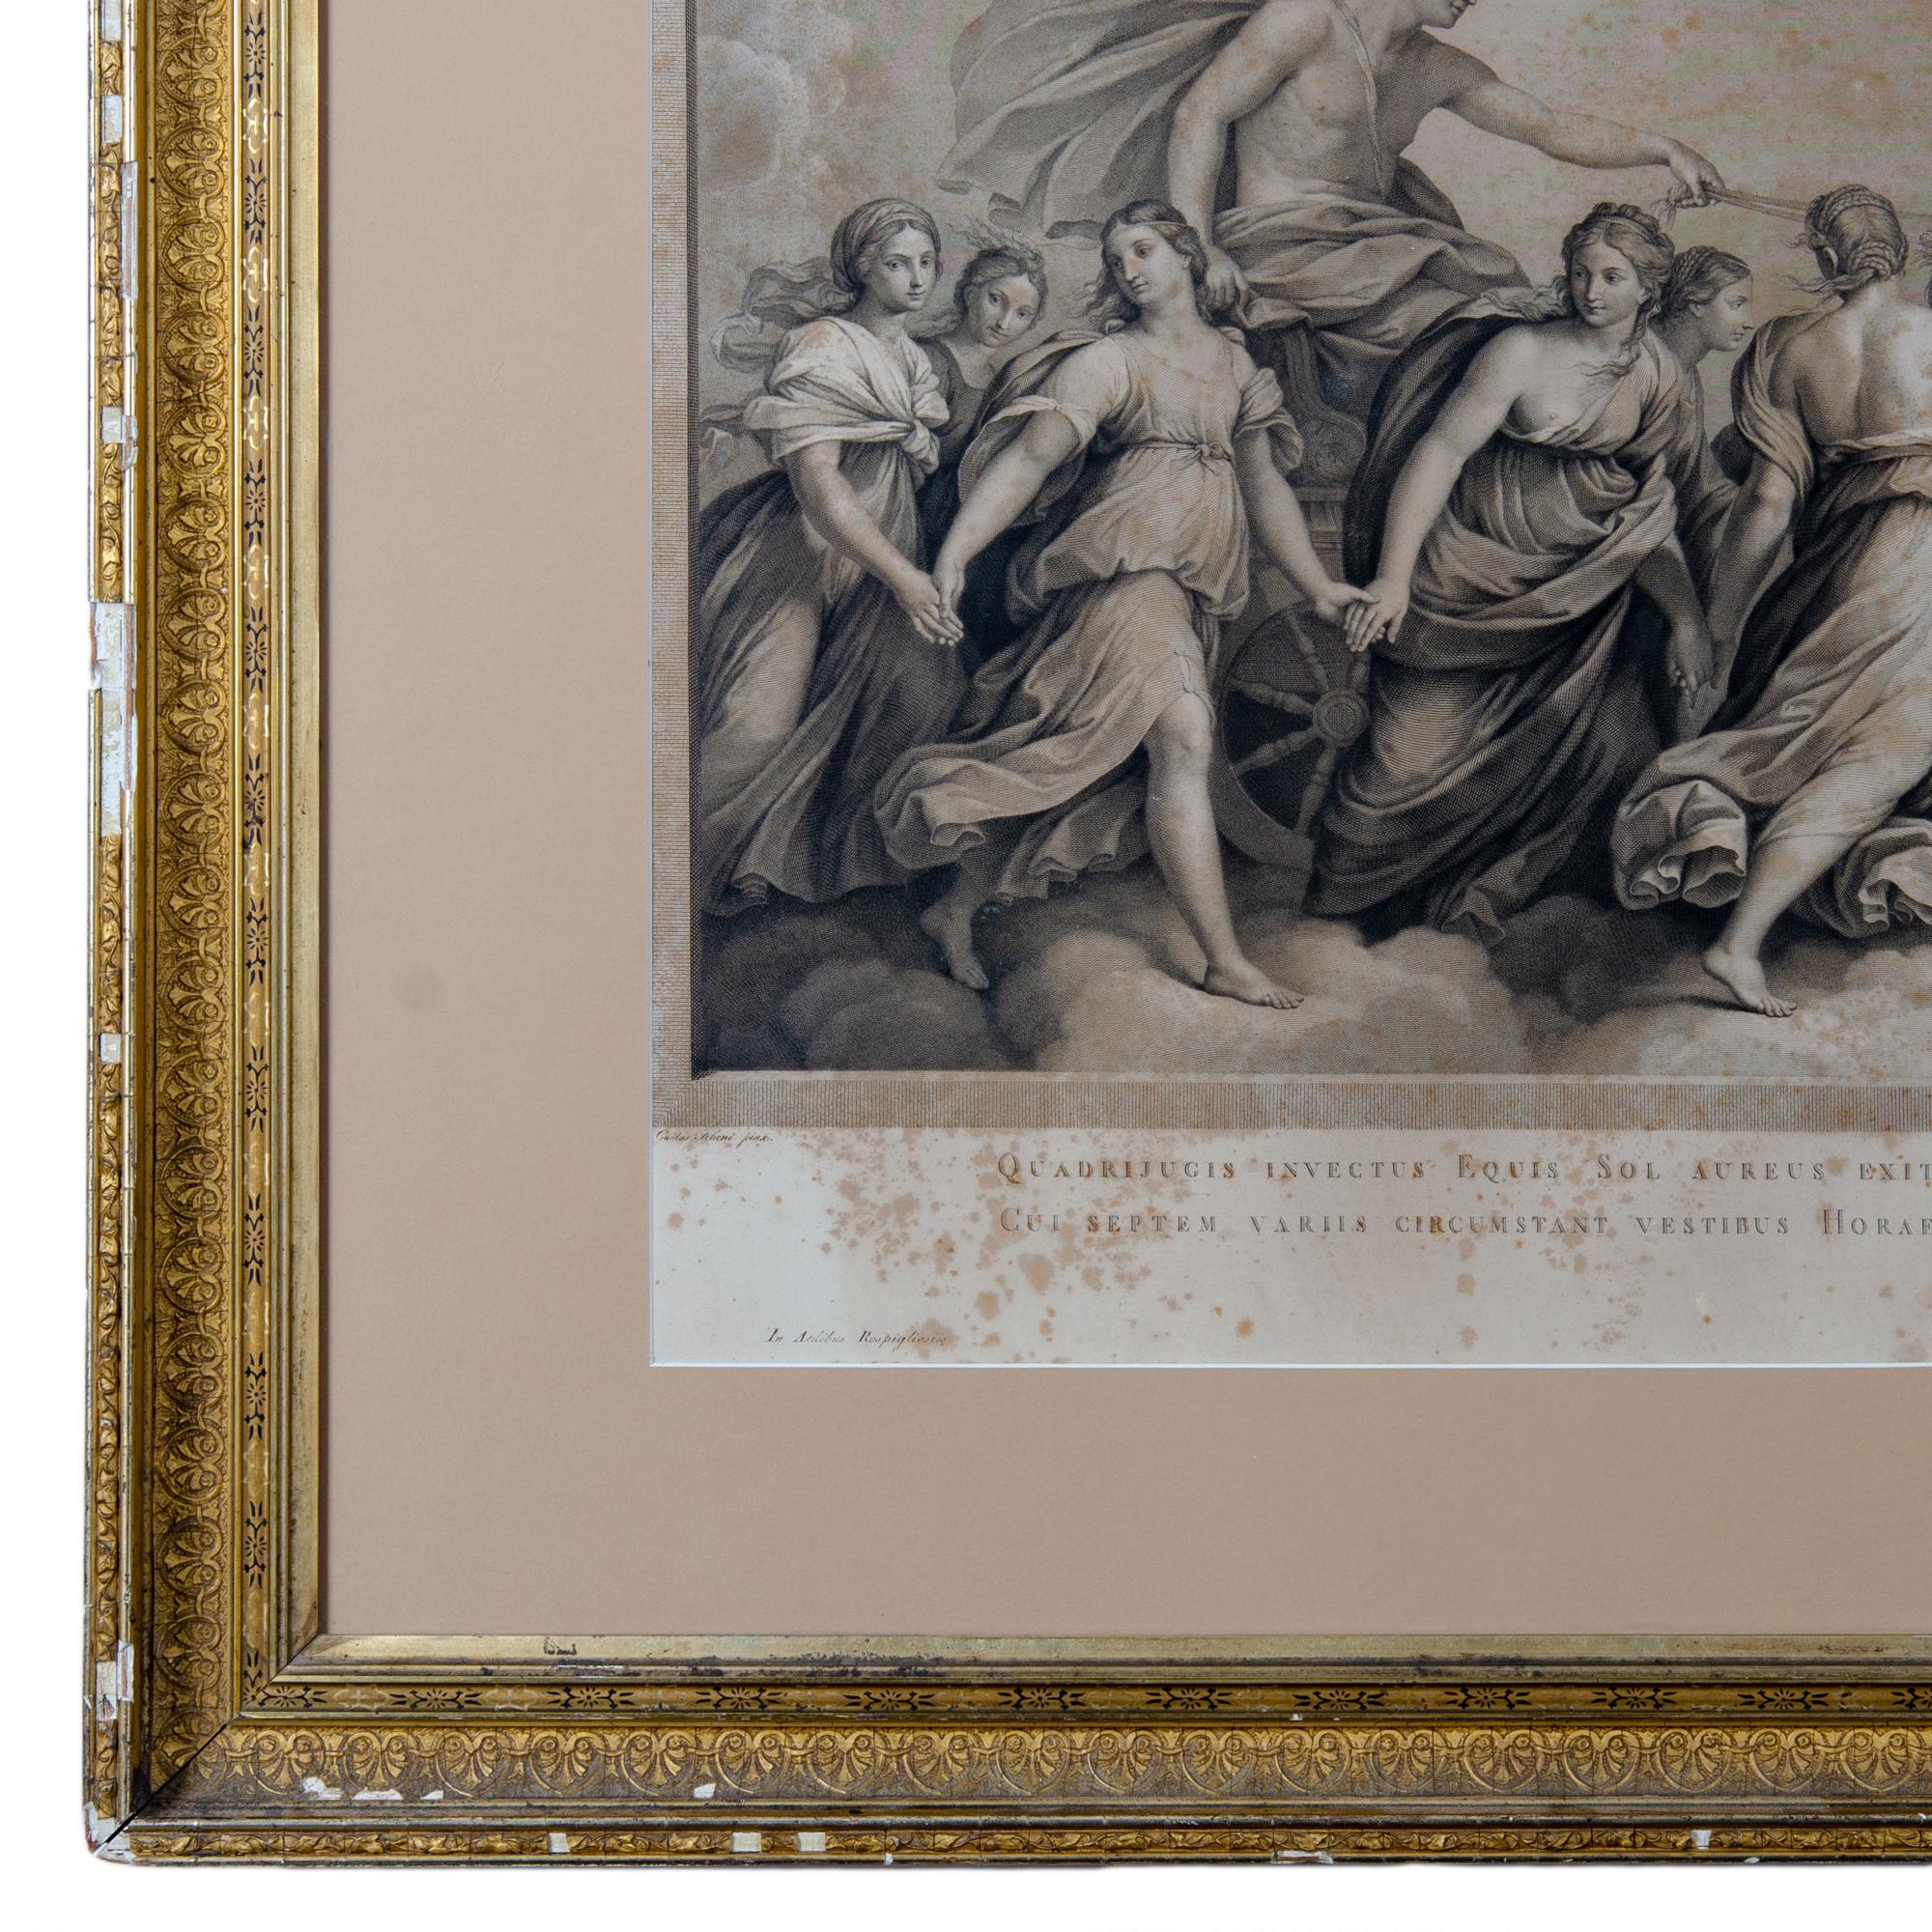 Aurora Engraving after Guido Reni Fresco by R.S. Morghen, c.1787 In Good Condition For Sale In Savannah, GA